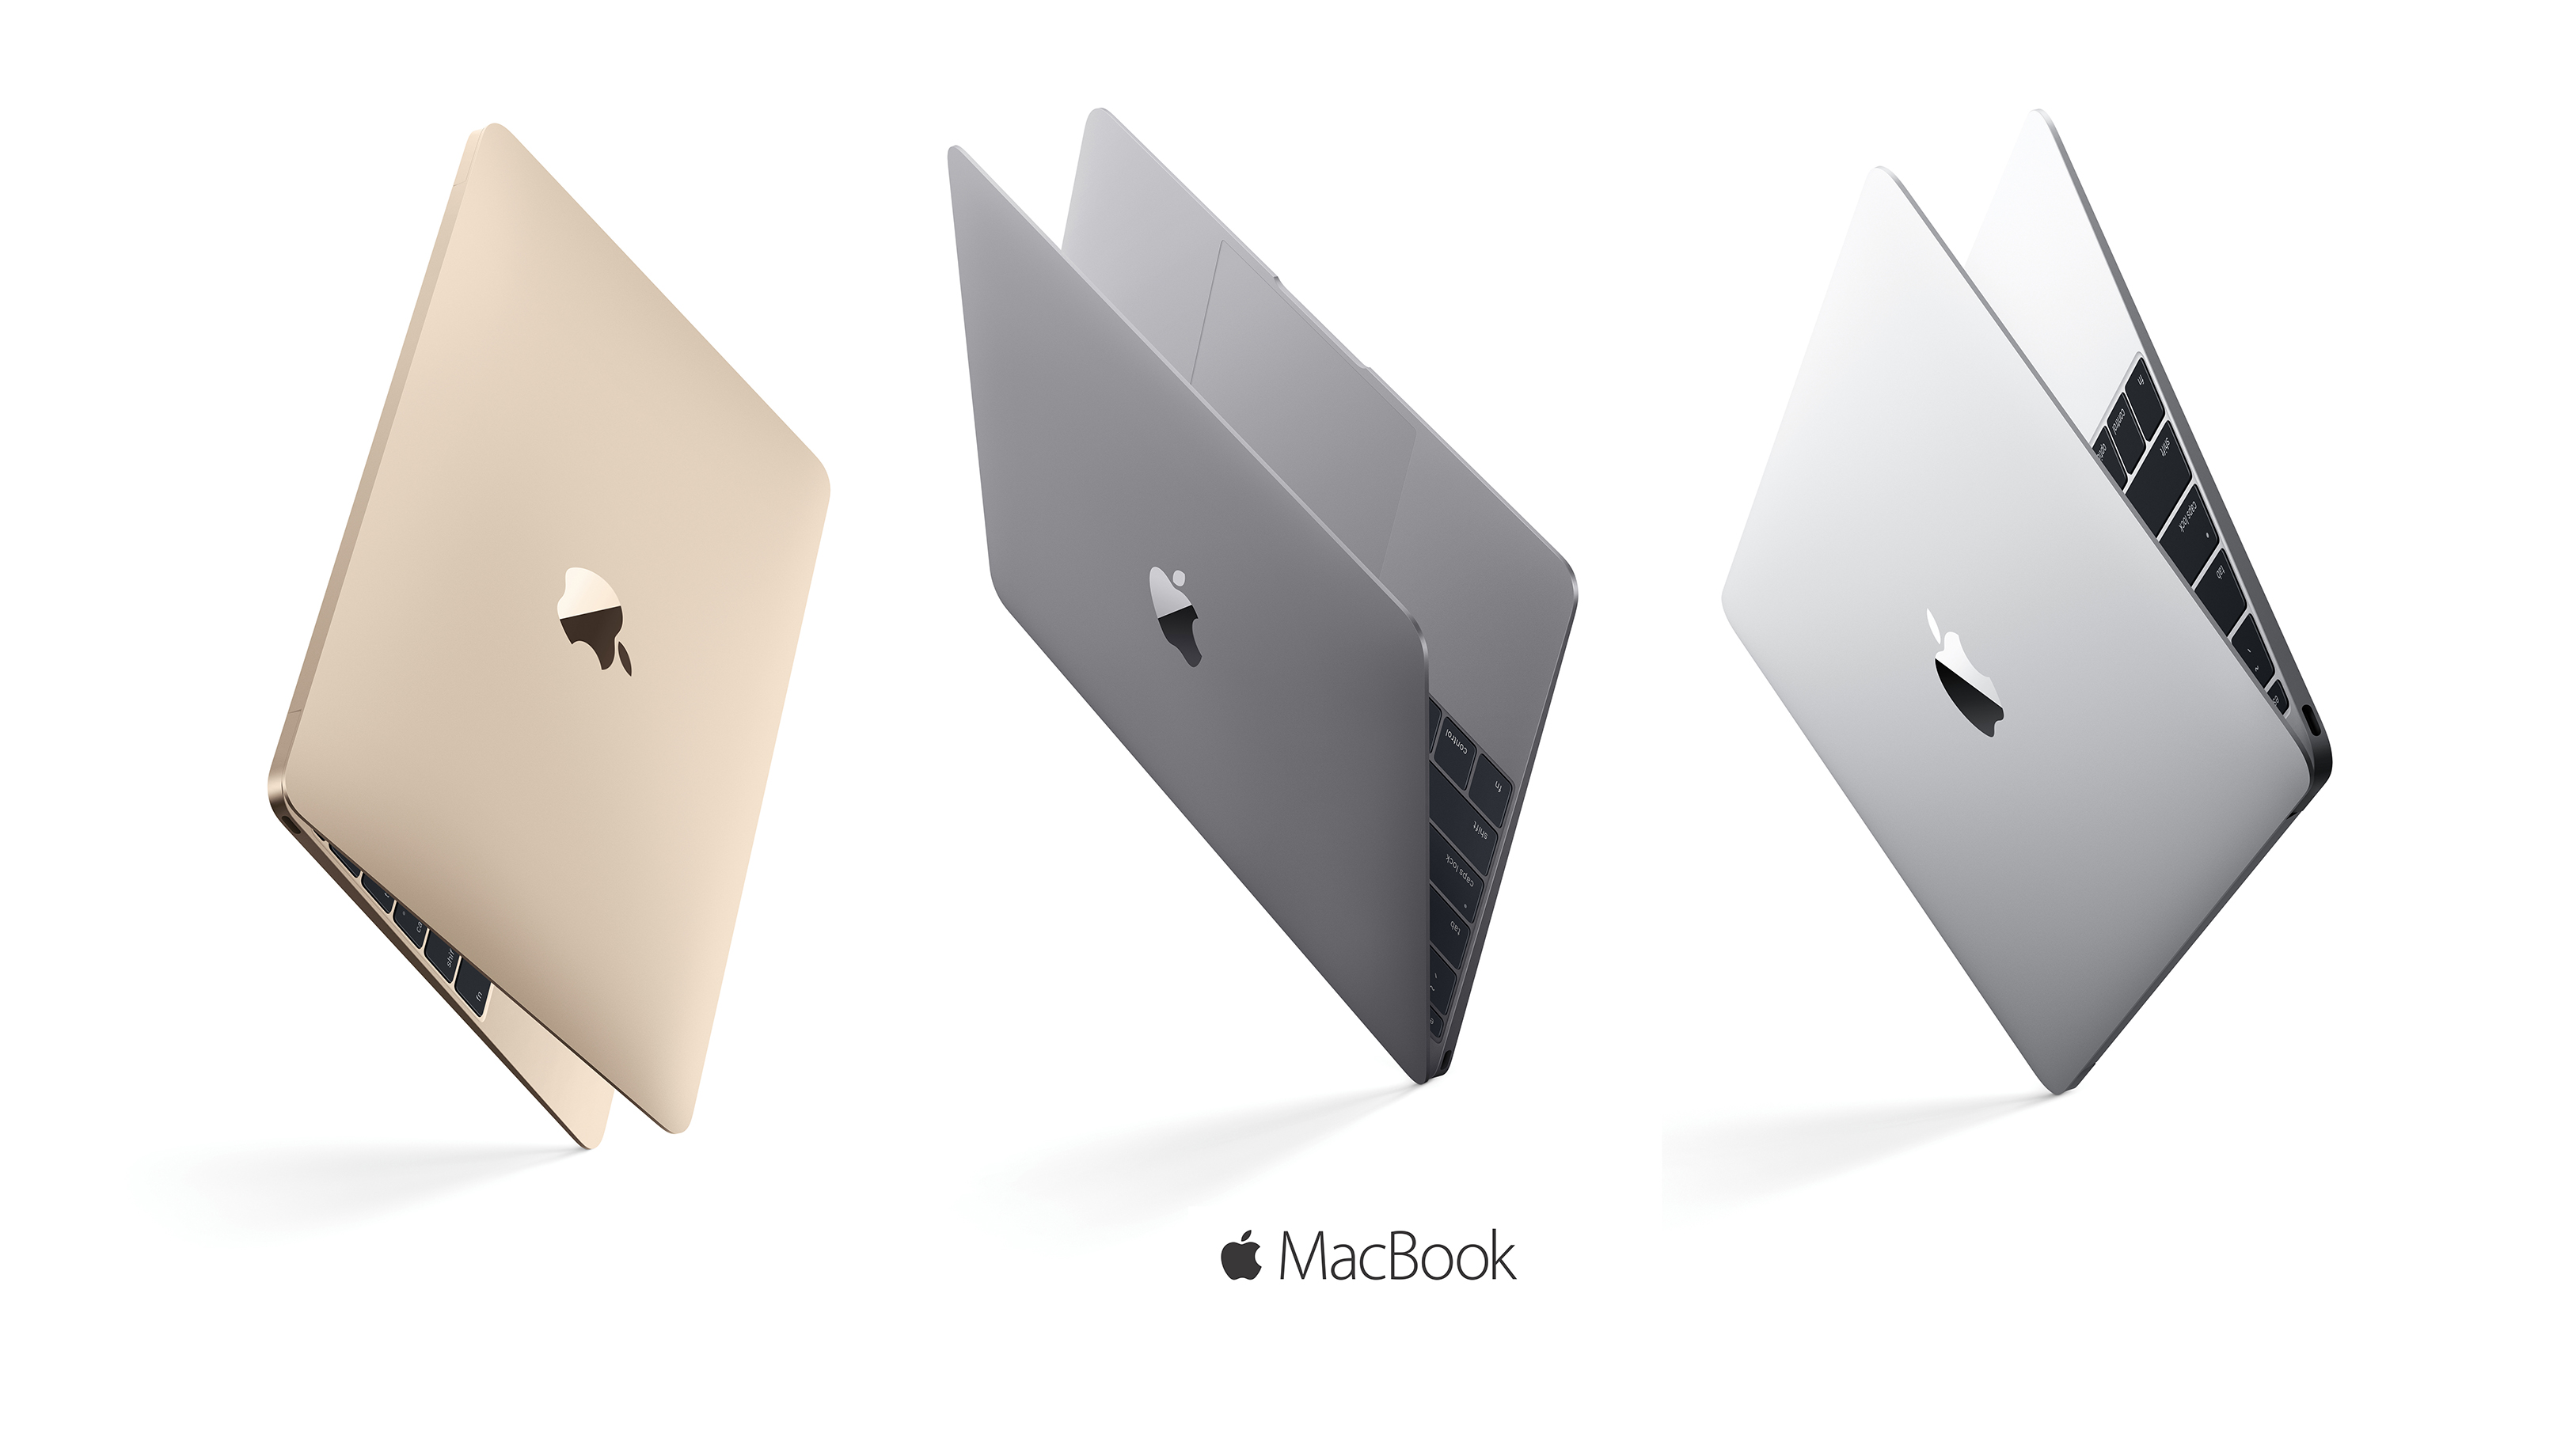 The 12-inch MacBook introduced in 2015 is now considered 'vintage' by Apple  - 9to5Mac